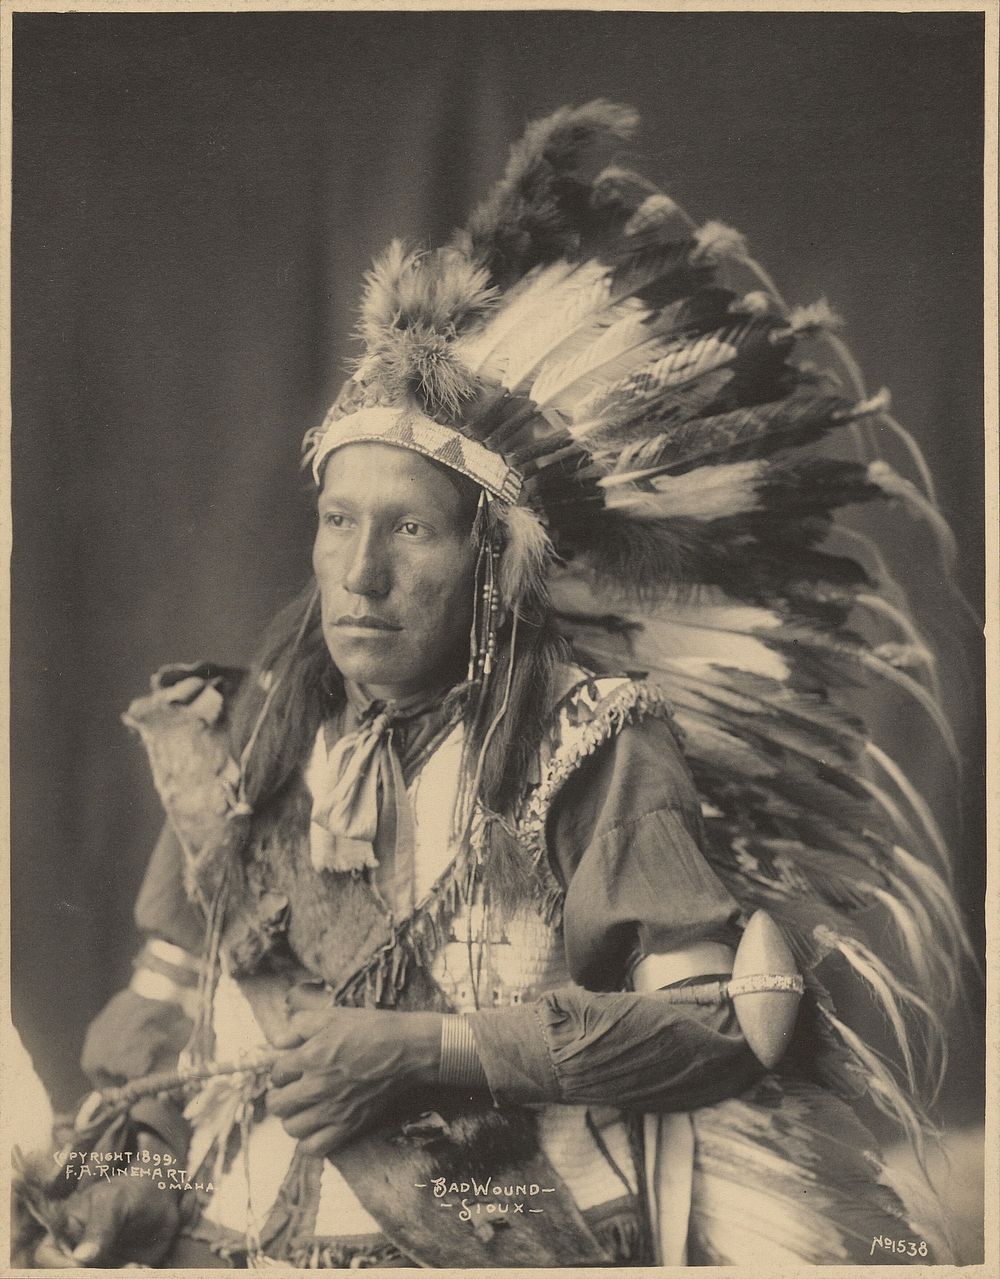 Bad Wound, Sioux by Adolph F Muhr and Frank A Rinehart